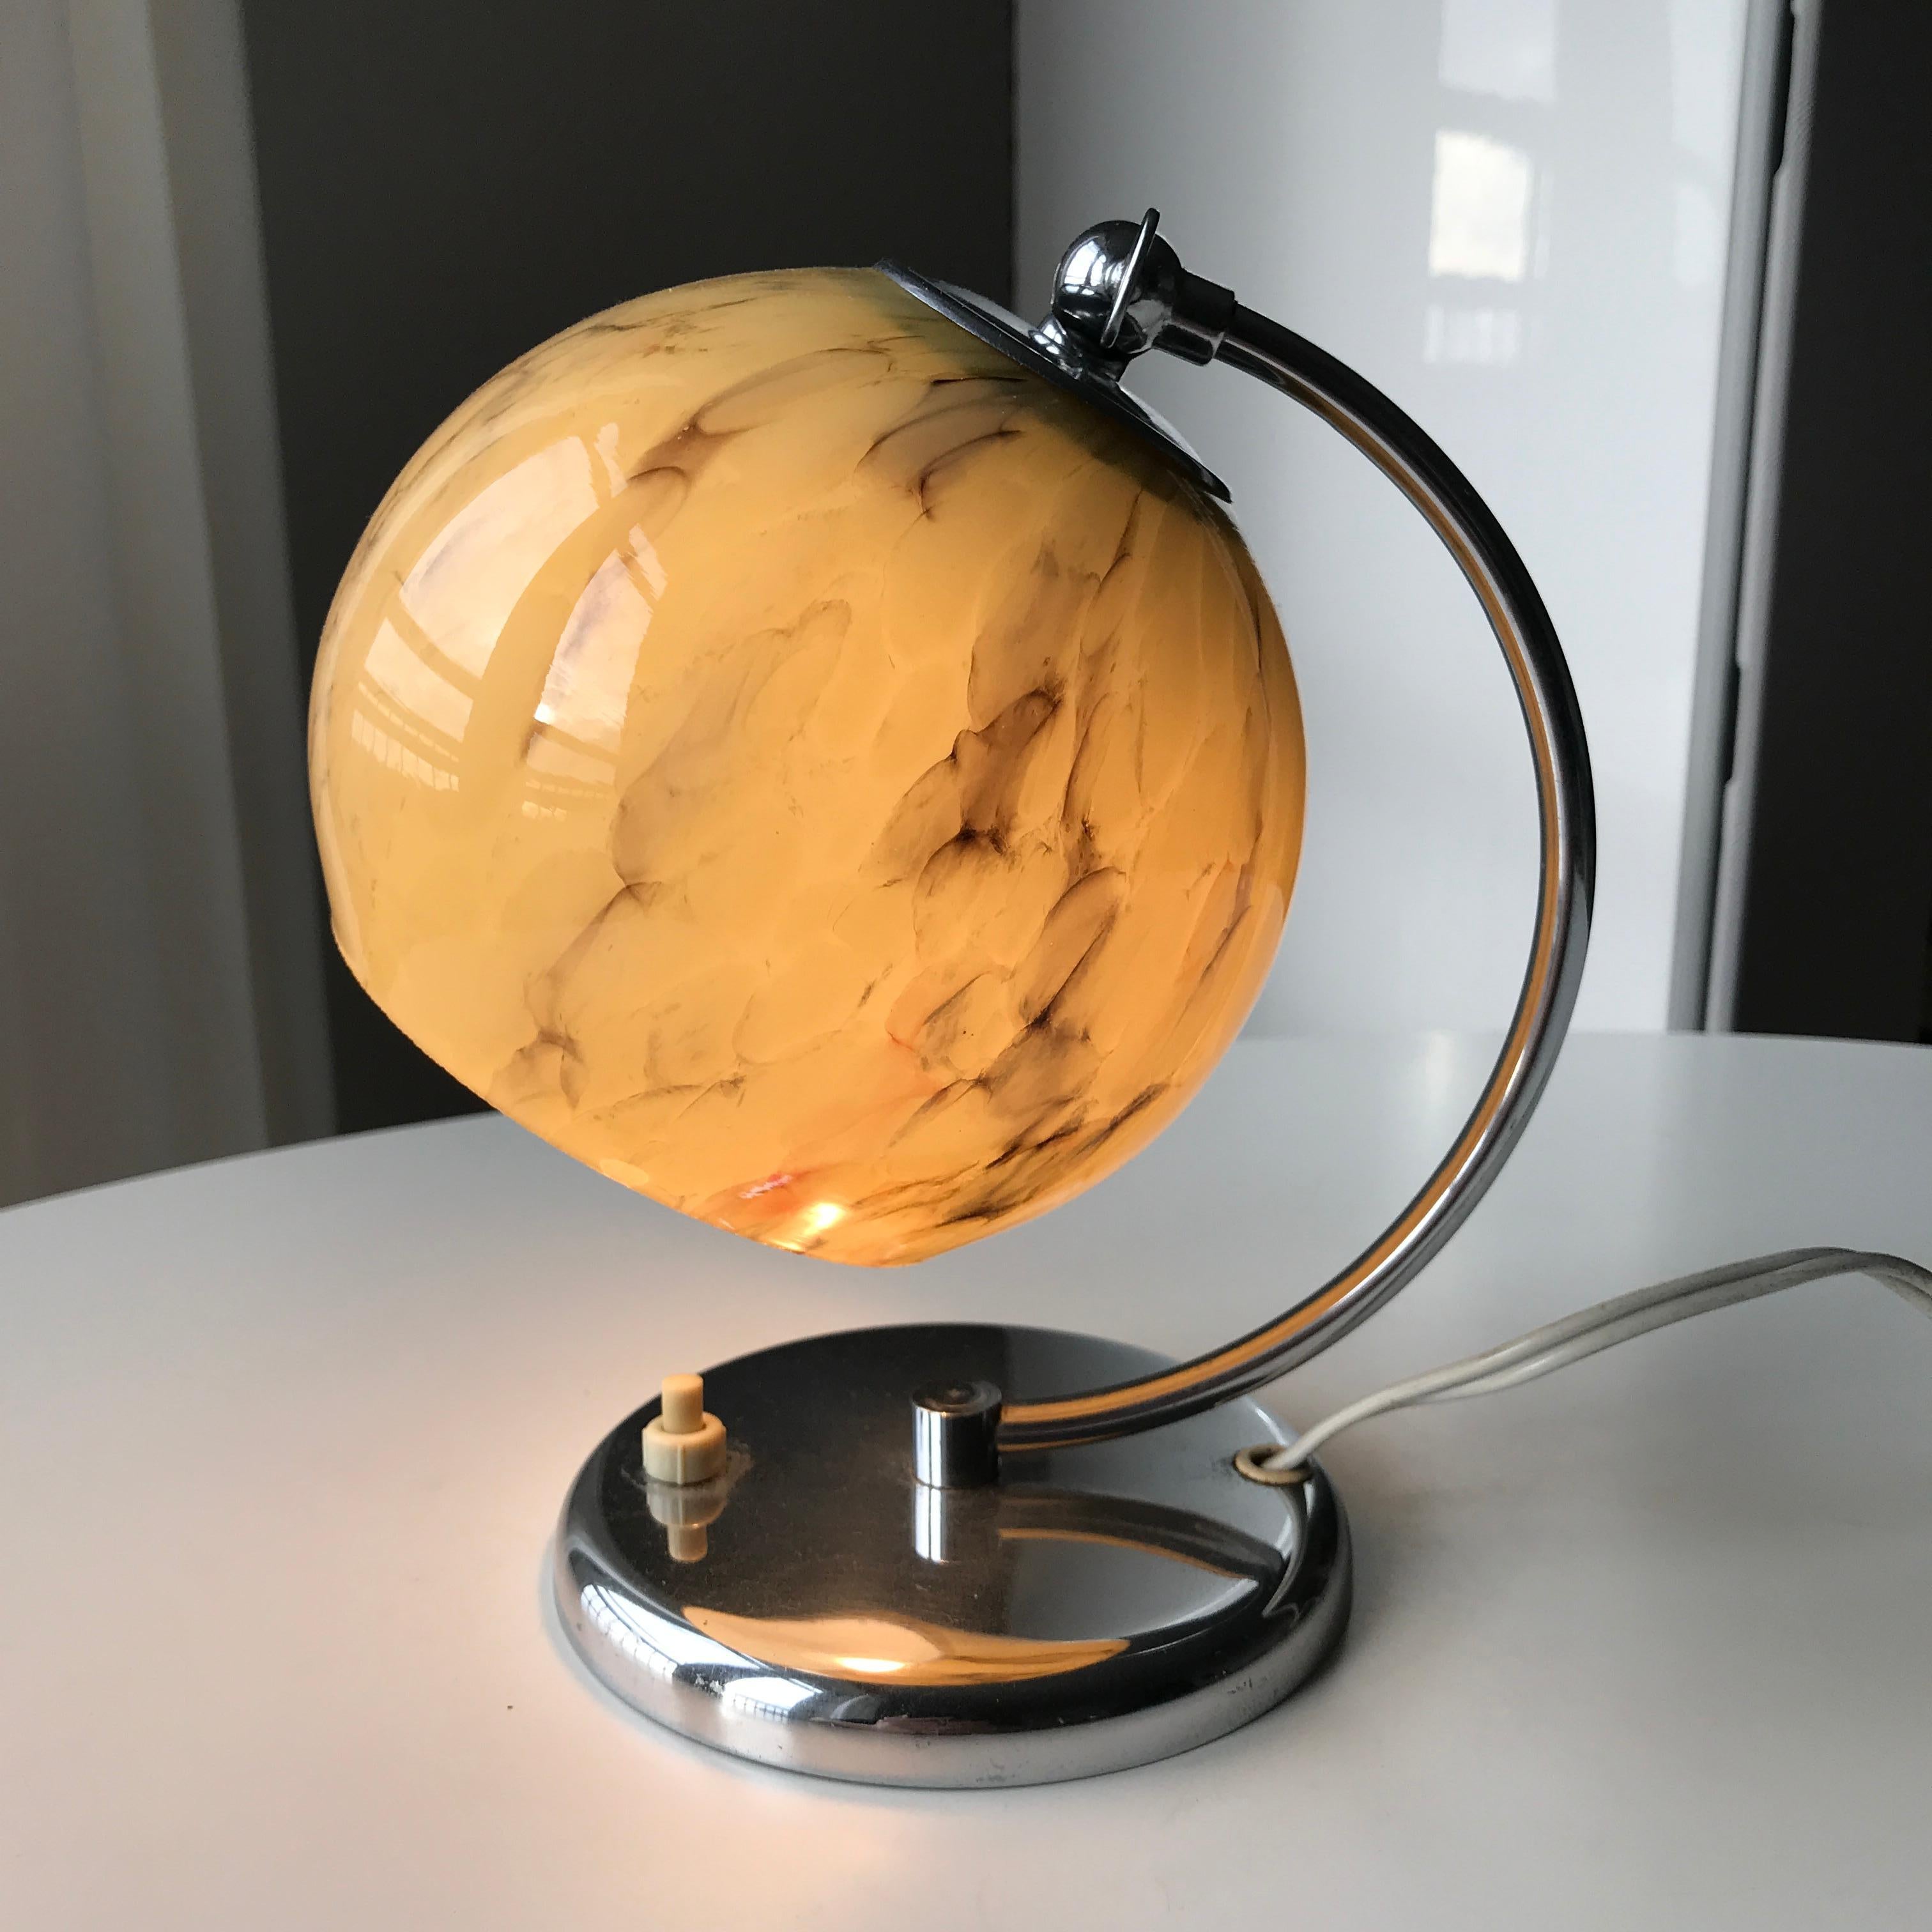 Danish Fog and Mørup Art Deco desk lamp with chromed base and neck. Layer by layer paline glass shade with marble decoration. Head angle adjustable. Very good working condition. Please notice last image from the Fog & Mørup catalogue with a similar